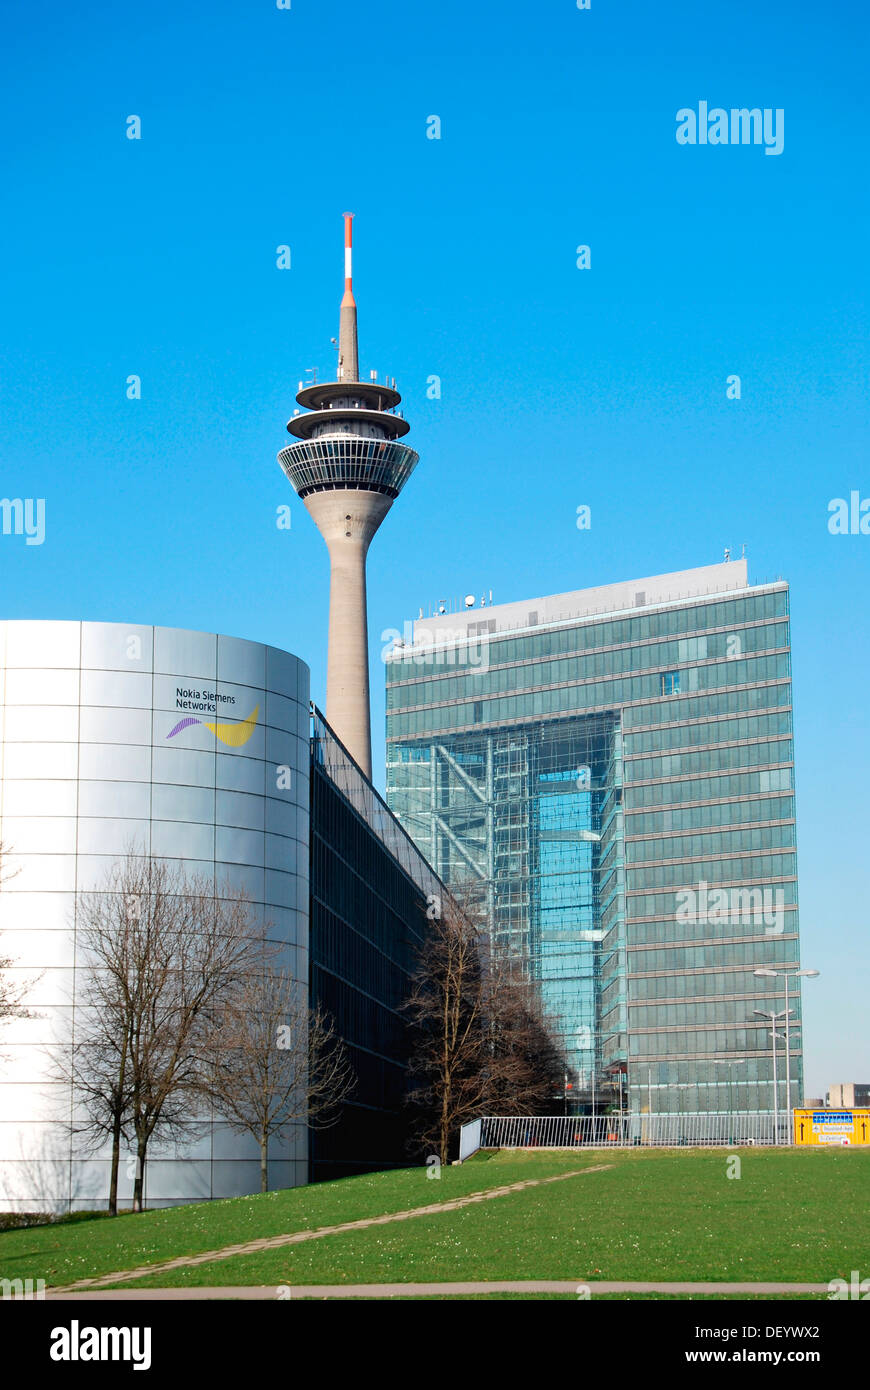 Development center of Nokia Siemens Networks company in front of Rheinturm tower and the Stadttor Building, Media Harbour Stock Photo